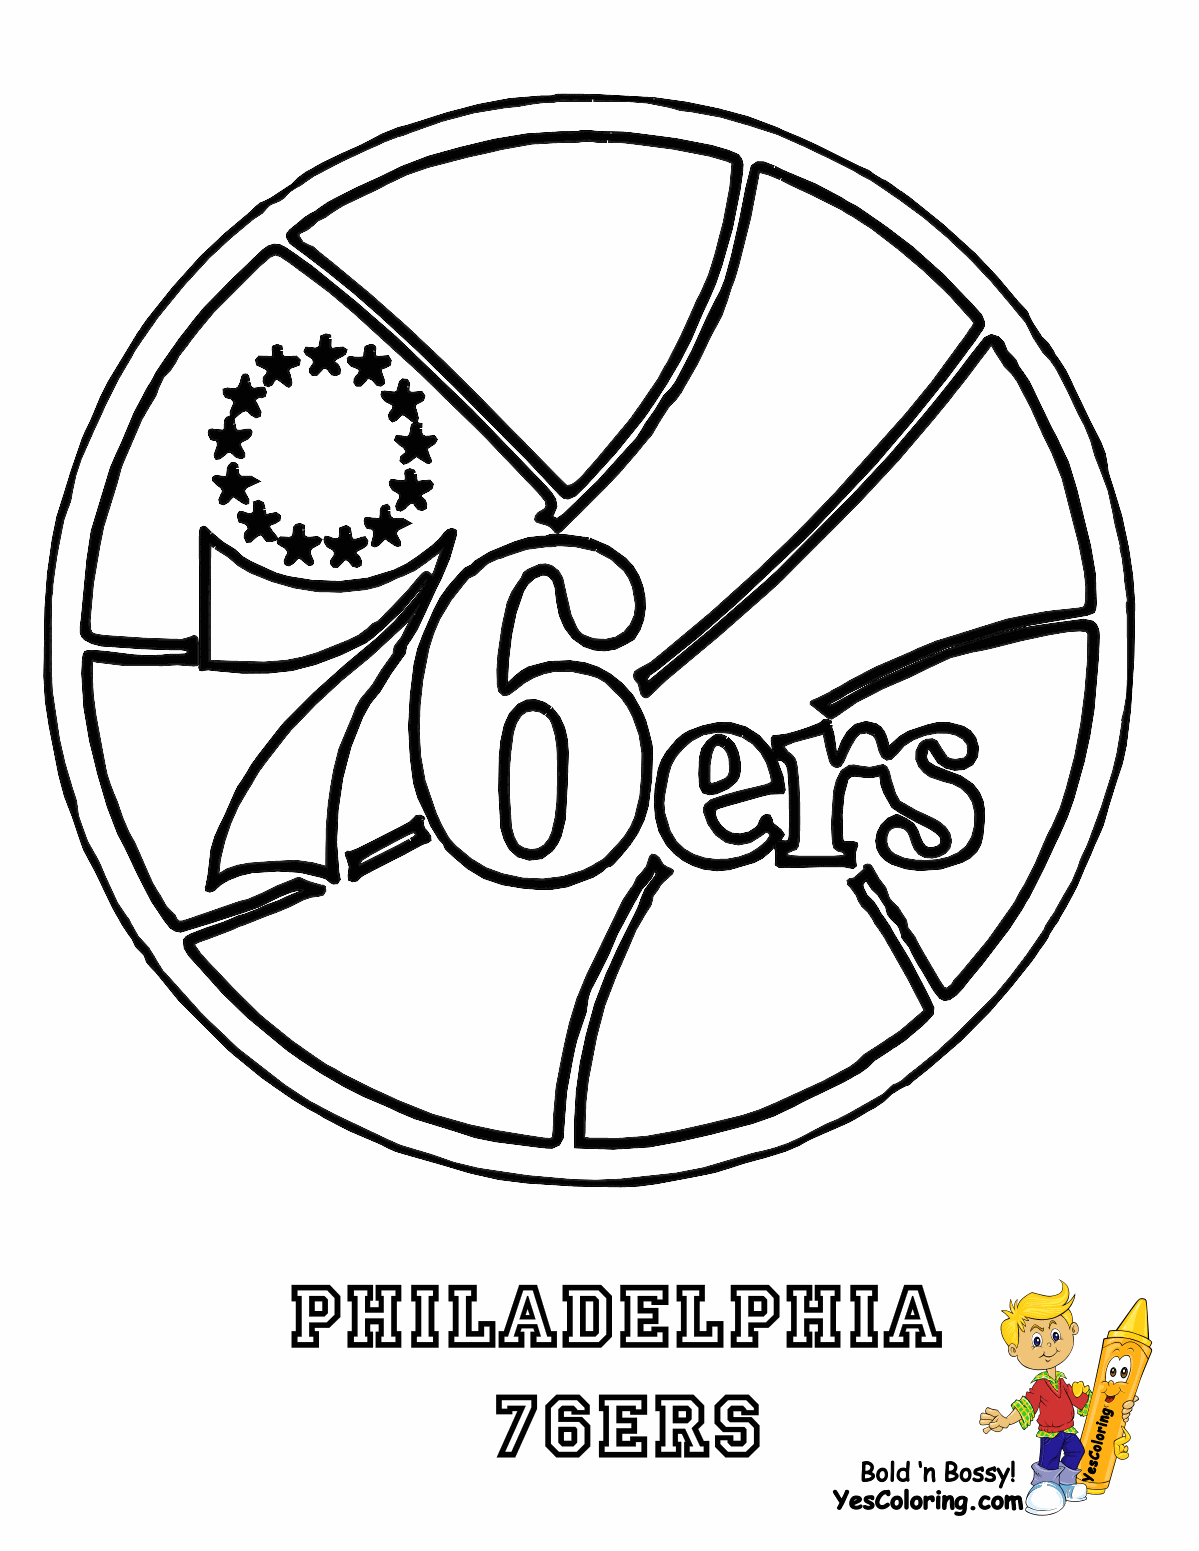 76ers #coloring #pages #philadelphia #2020 | Football ...